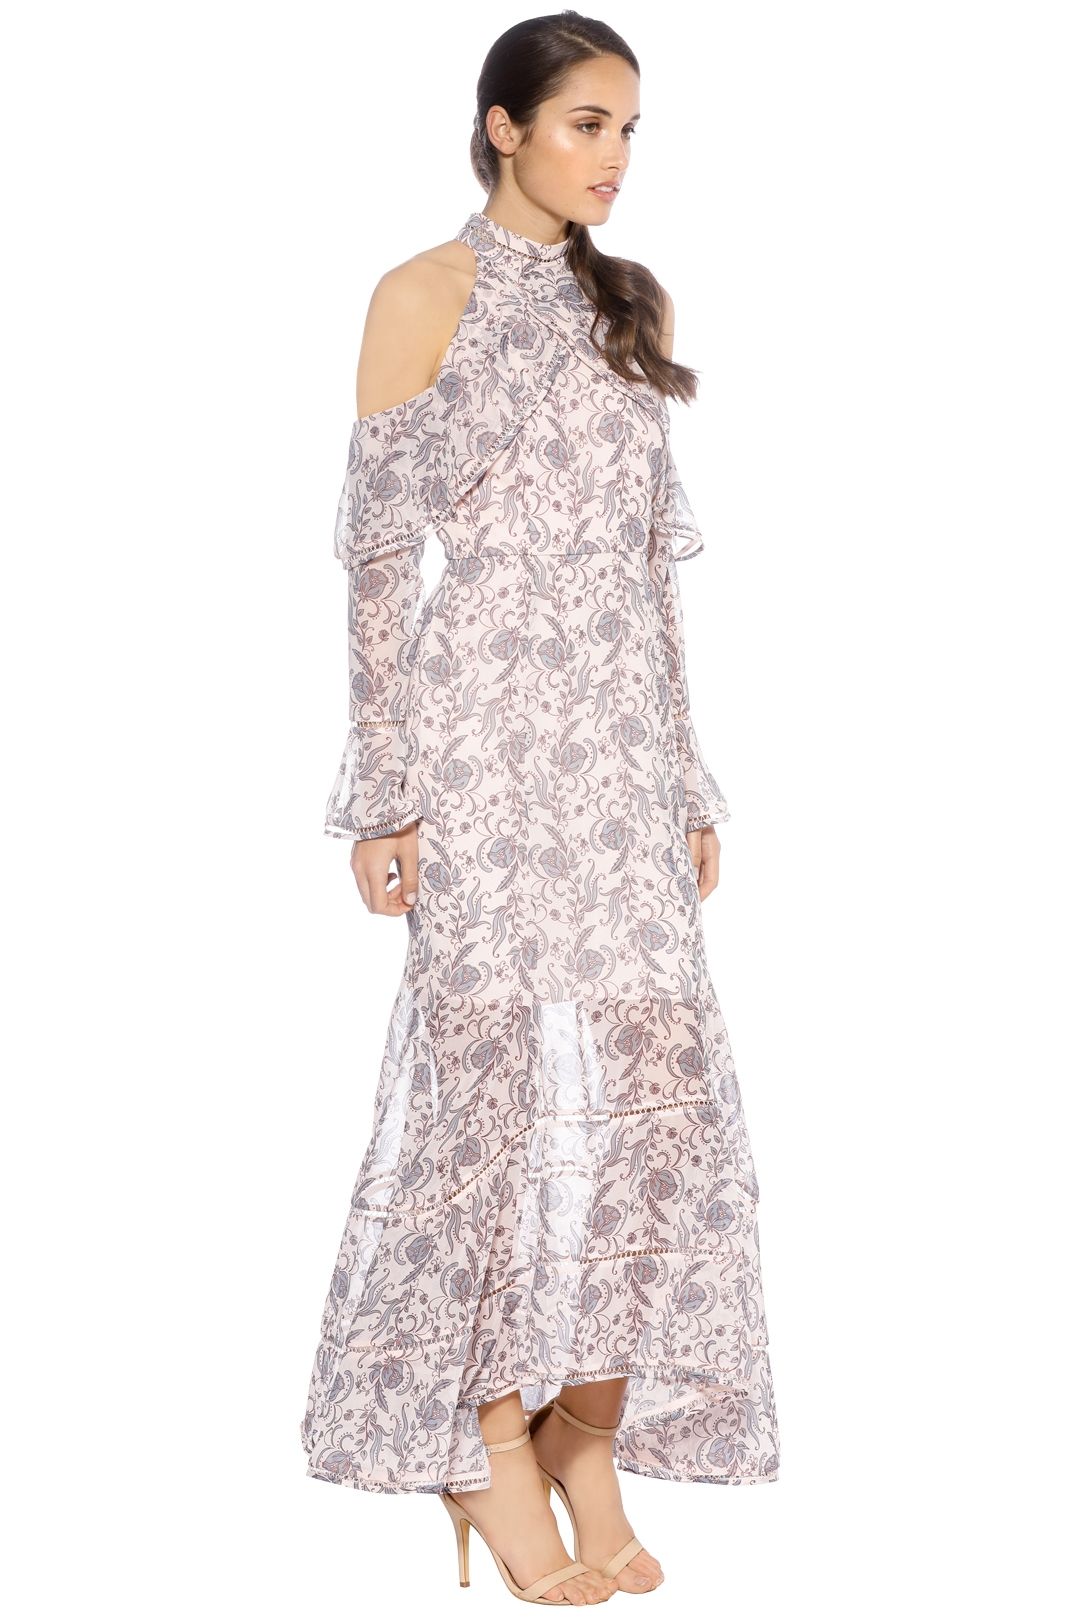 Keepsake the Label - Lovers Holiday Gown - Wallpaper Floral - Side